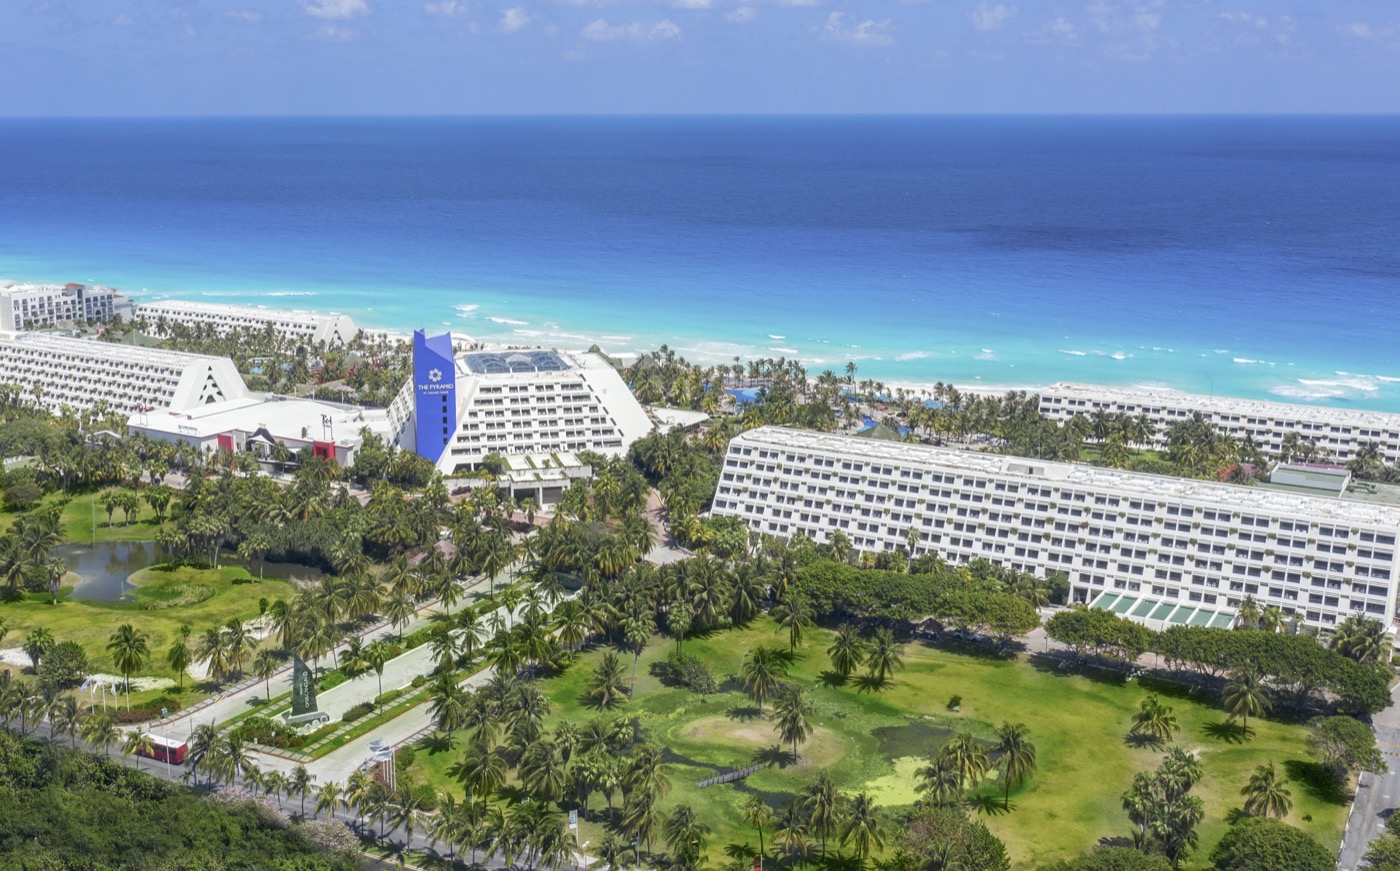 Panoramic View of Hotel Grand Oasis Cancun with ocean view